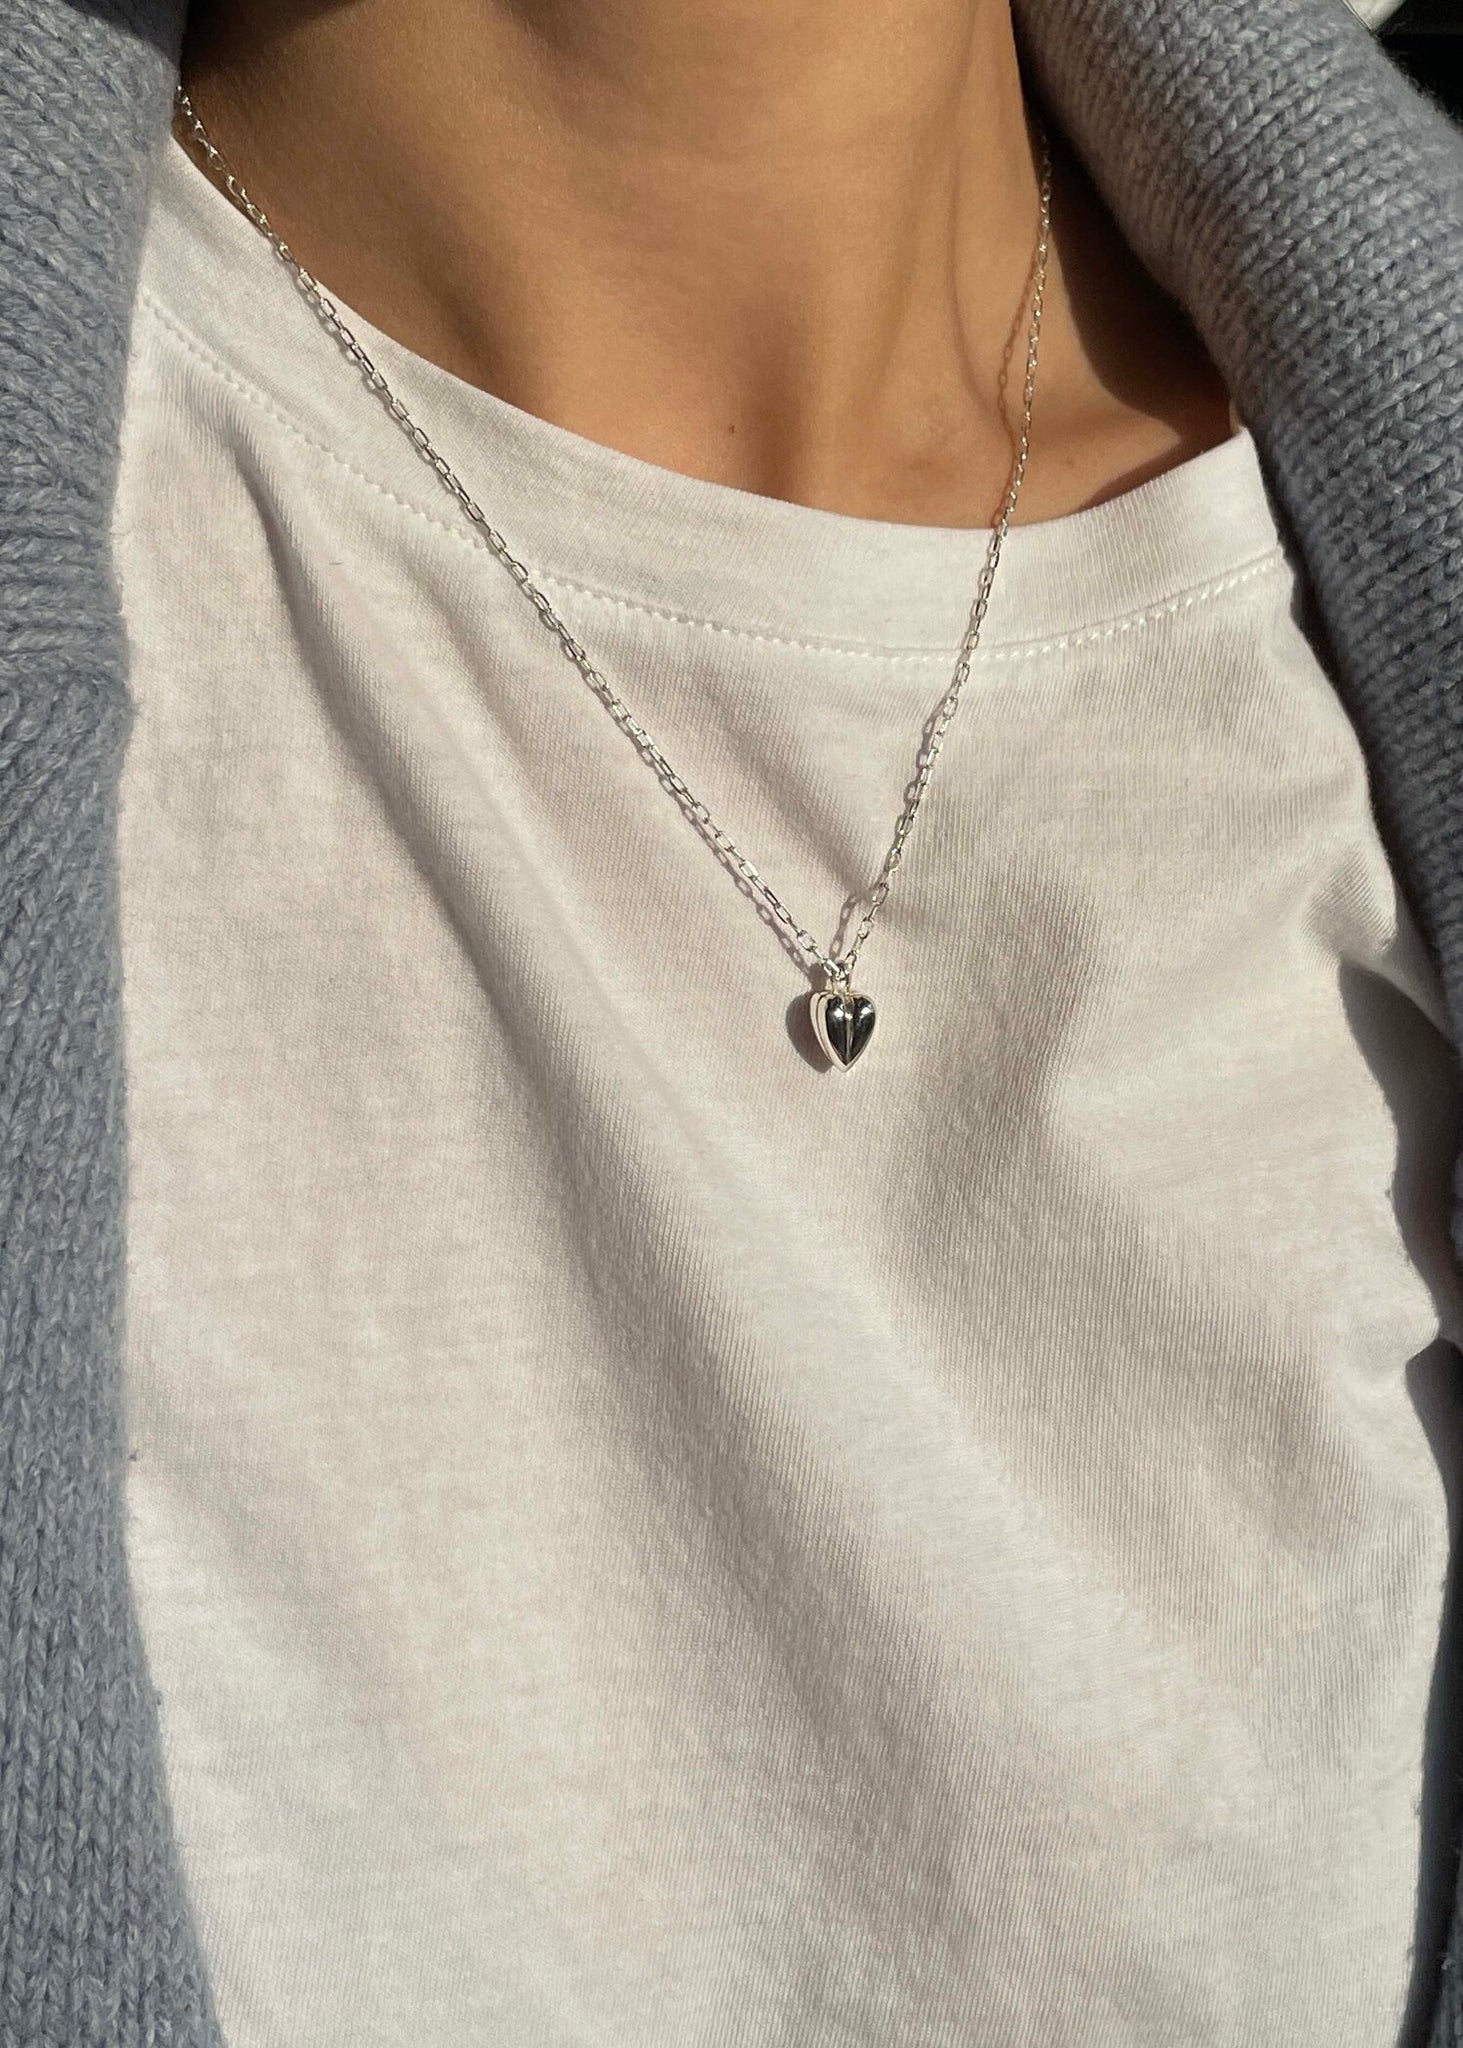 SILOUHAIT IN LOVE NECKLACE I